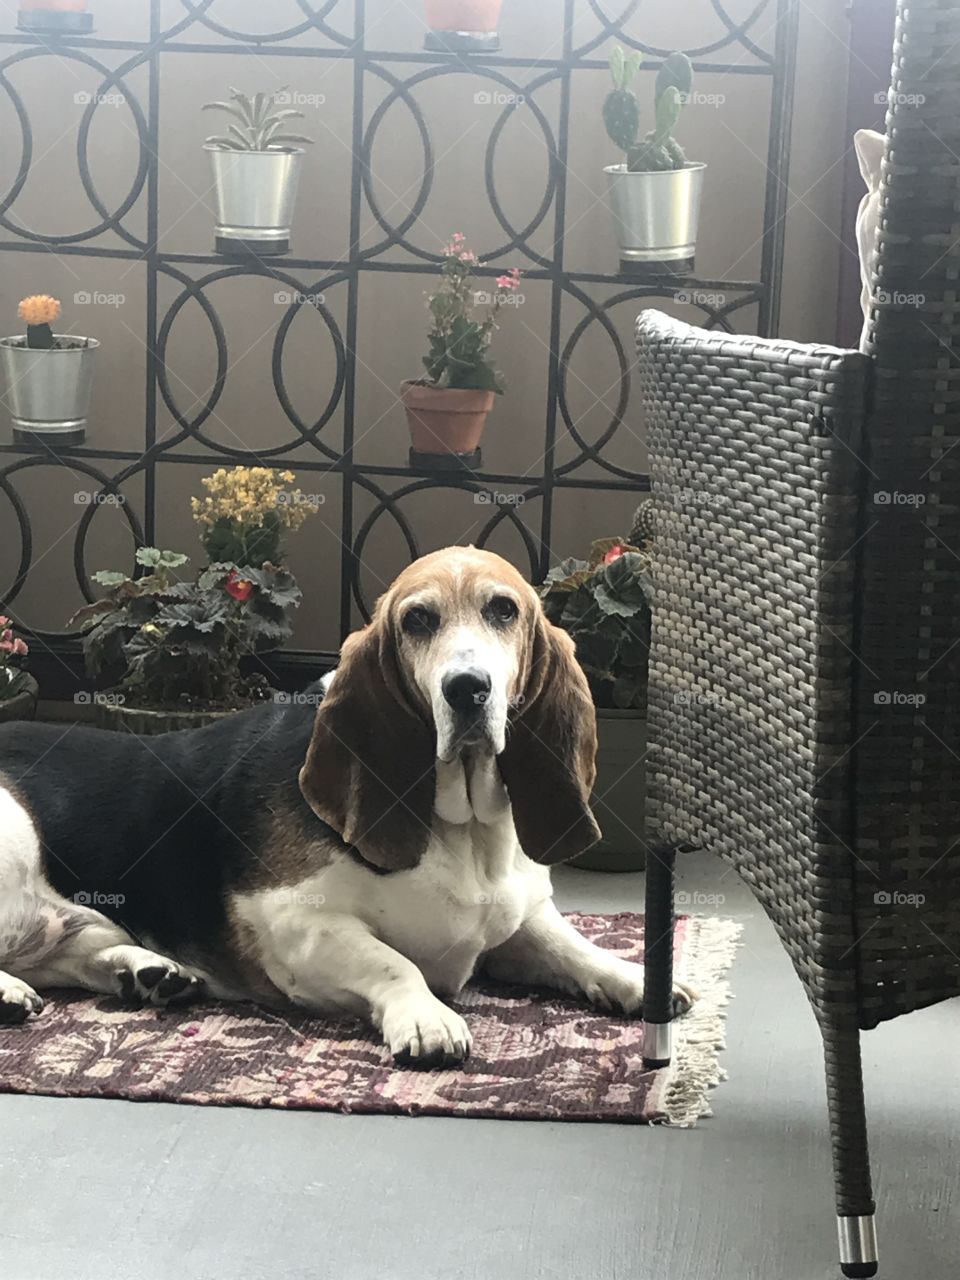 Patio, hound, dog, basset hound, flowers, wicker, relaxed, laying, 